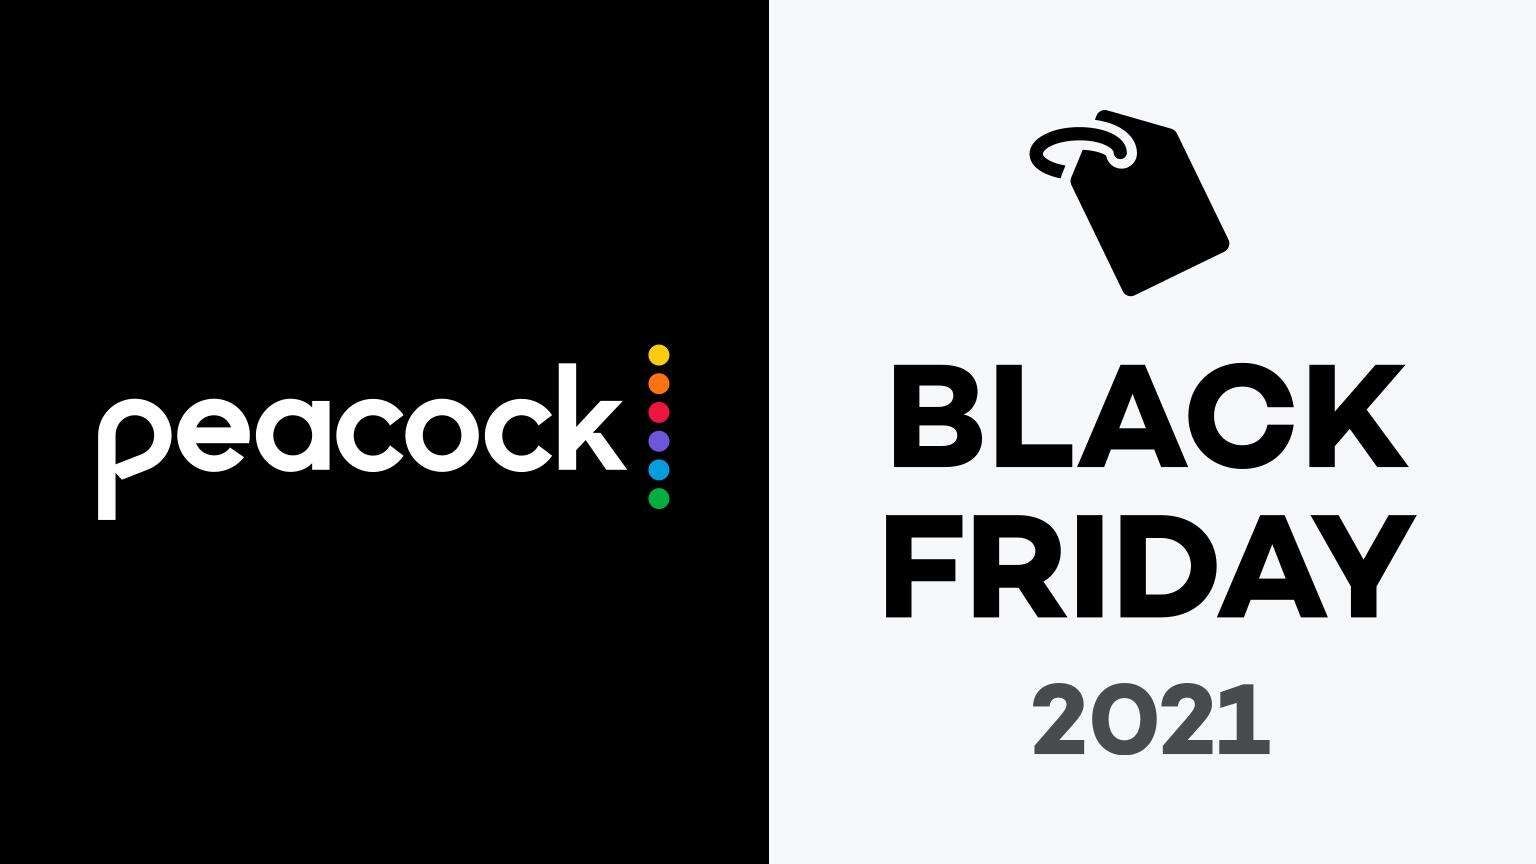 2023 Peacock Black Friday deal: Get a one-year Premium plan for